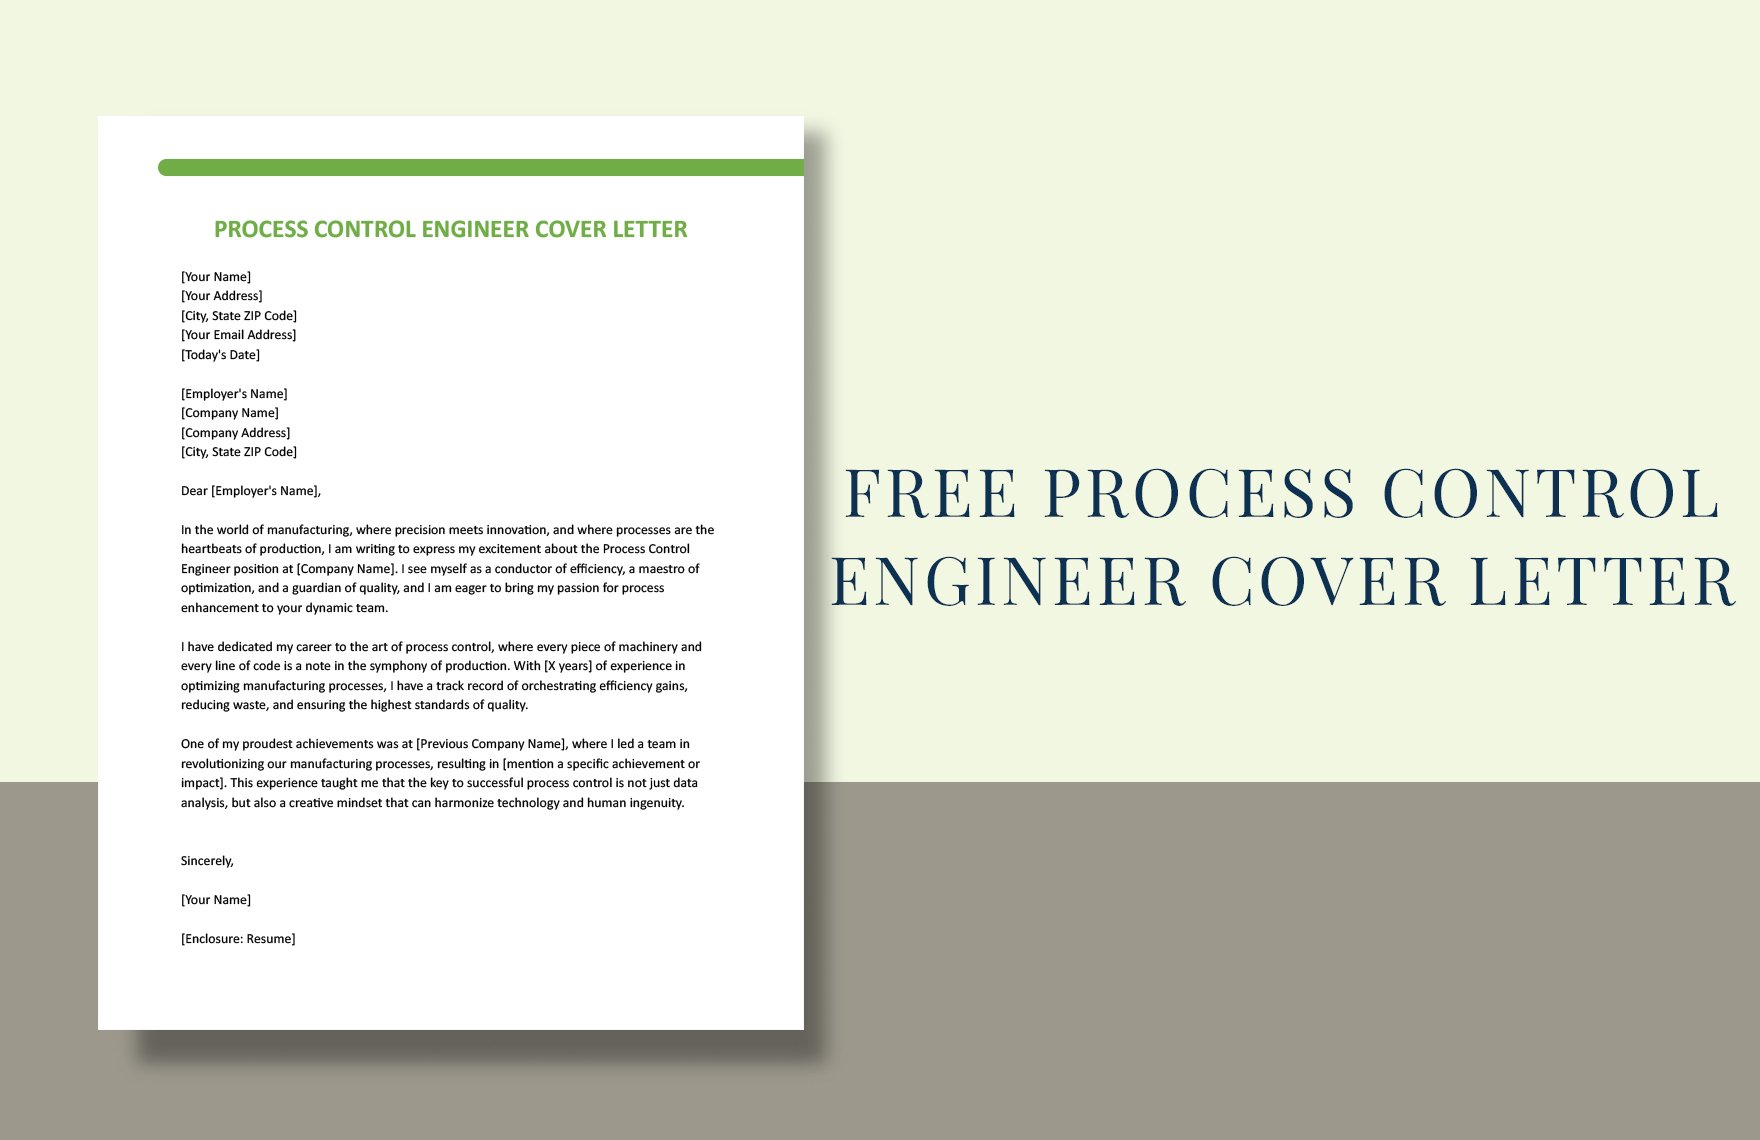 Process Control Engineer Cover Letter